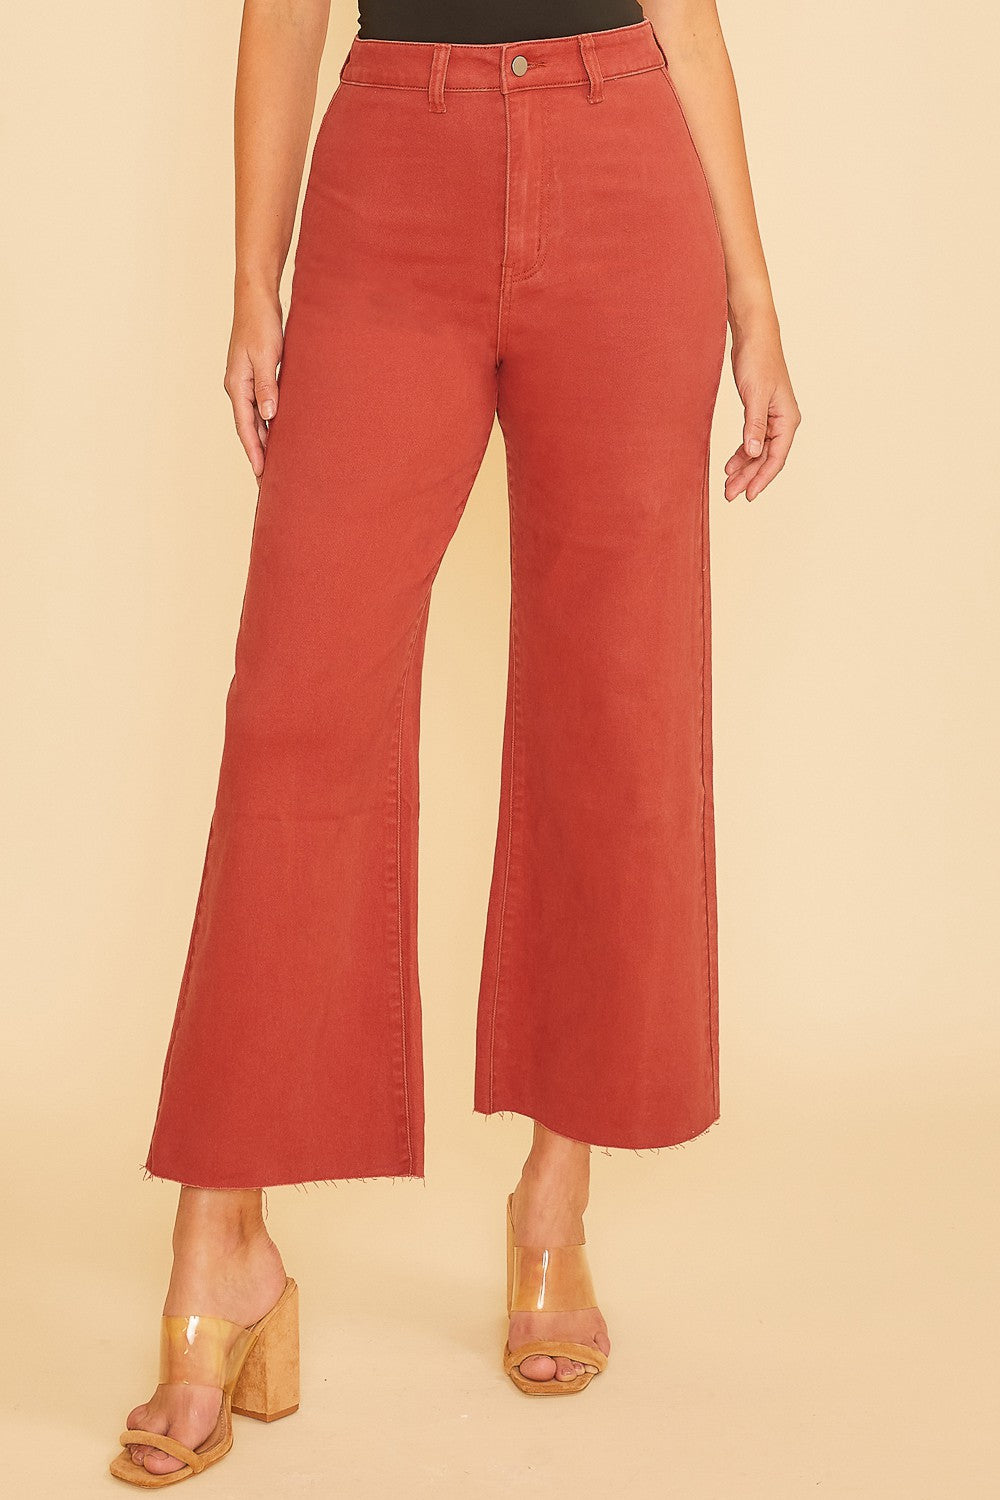 Mineral Red Wide Leg Jeans